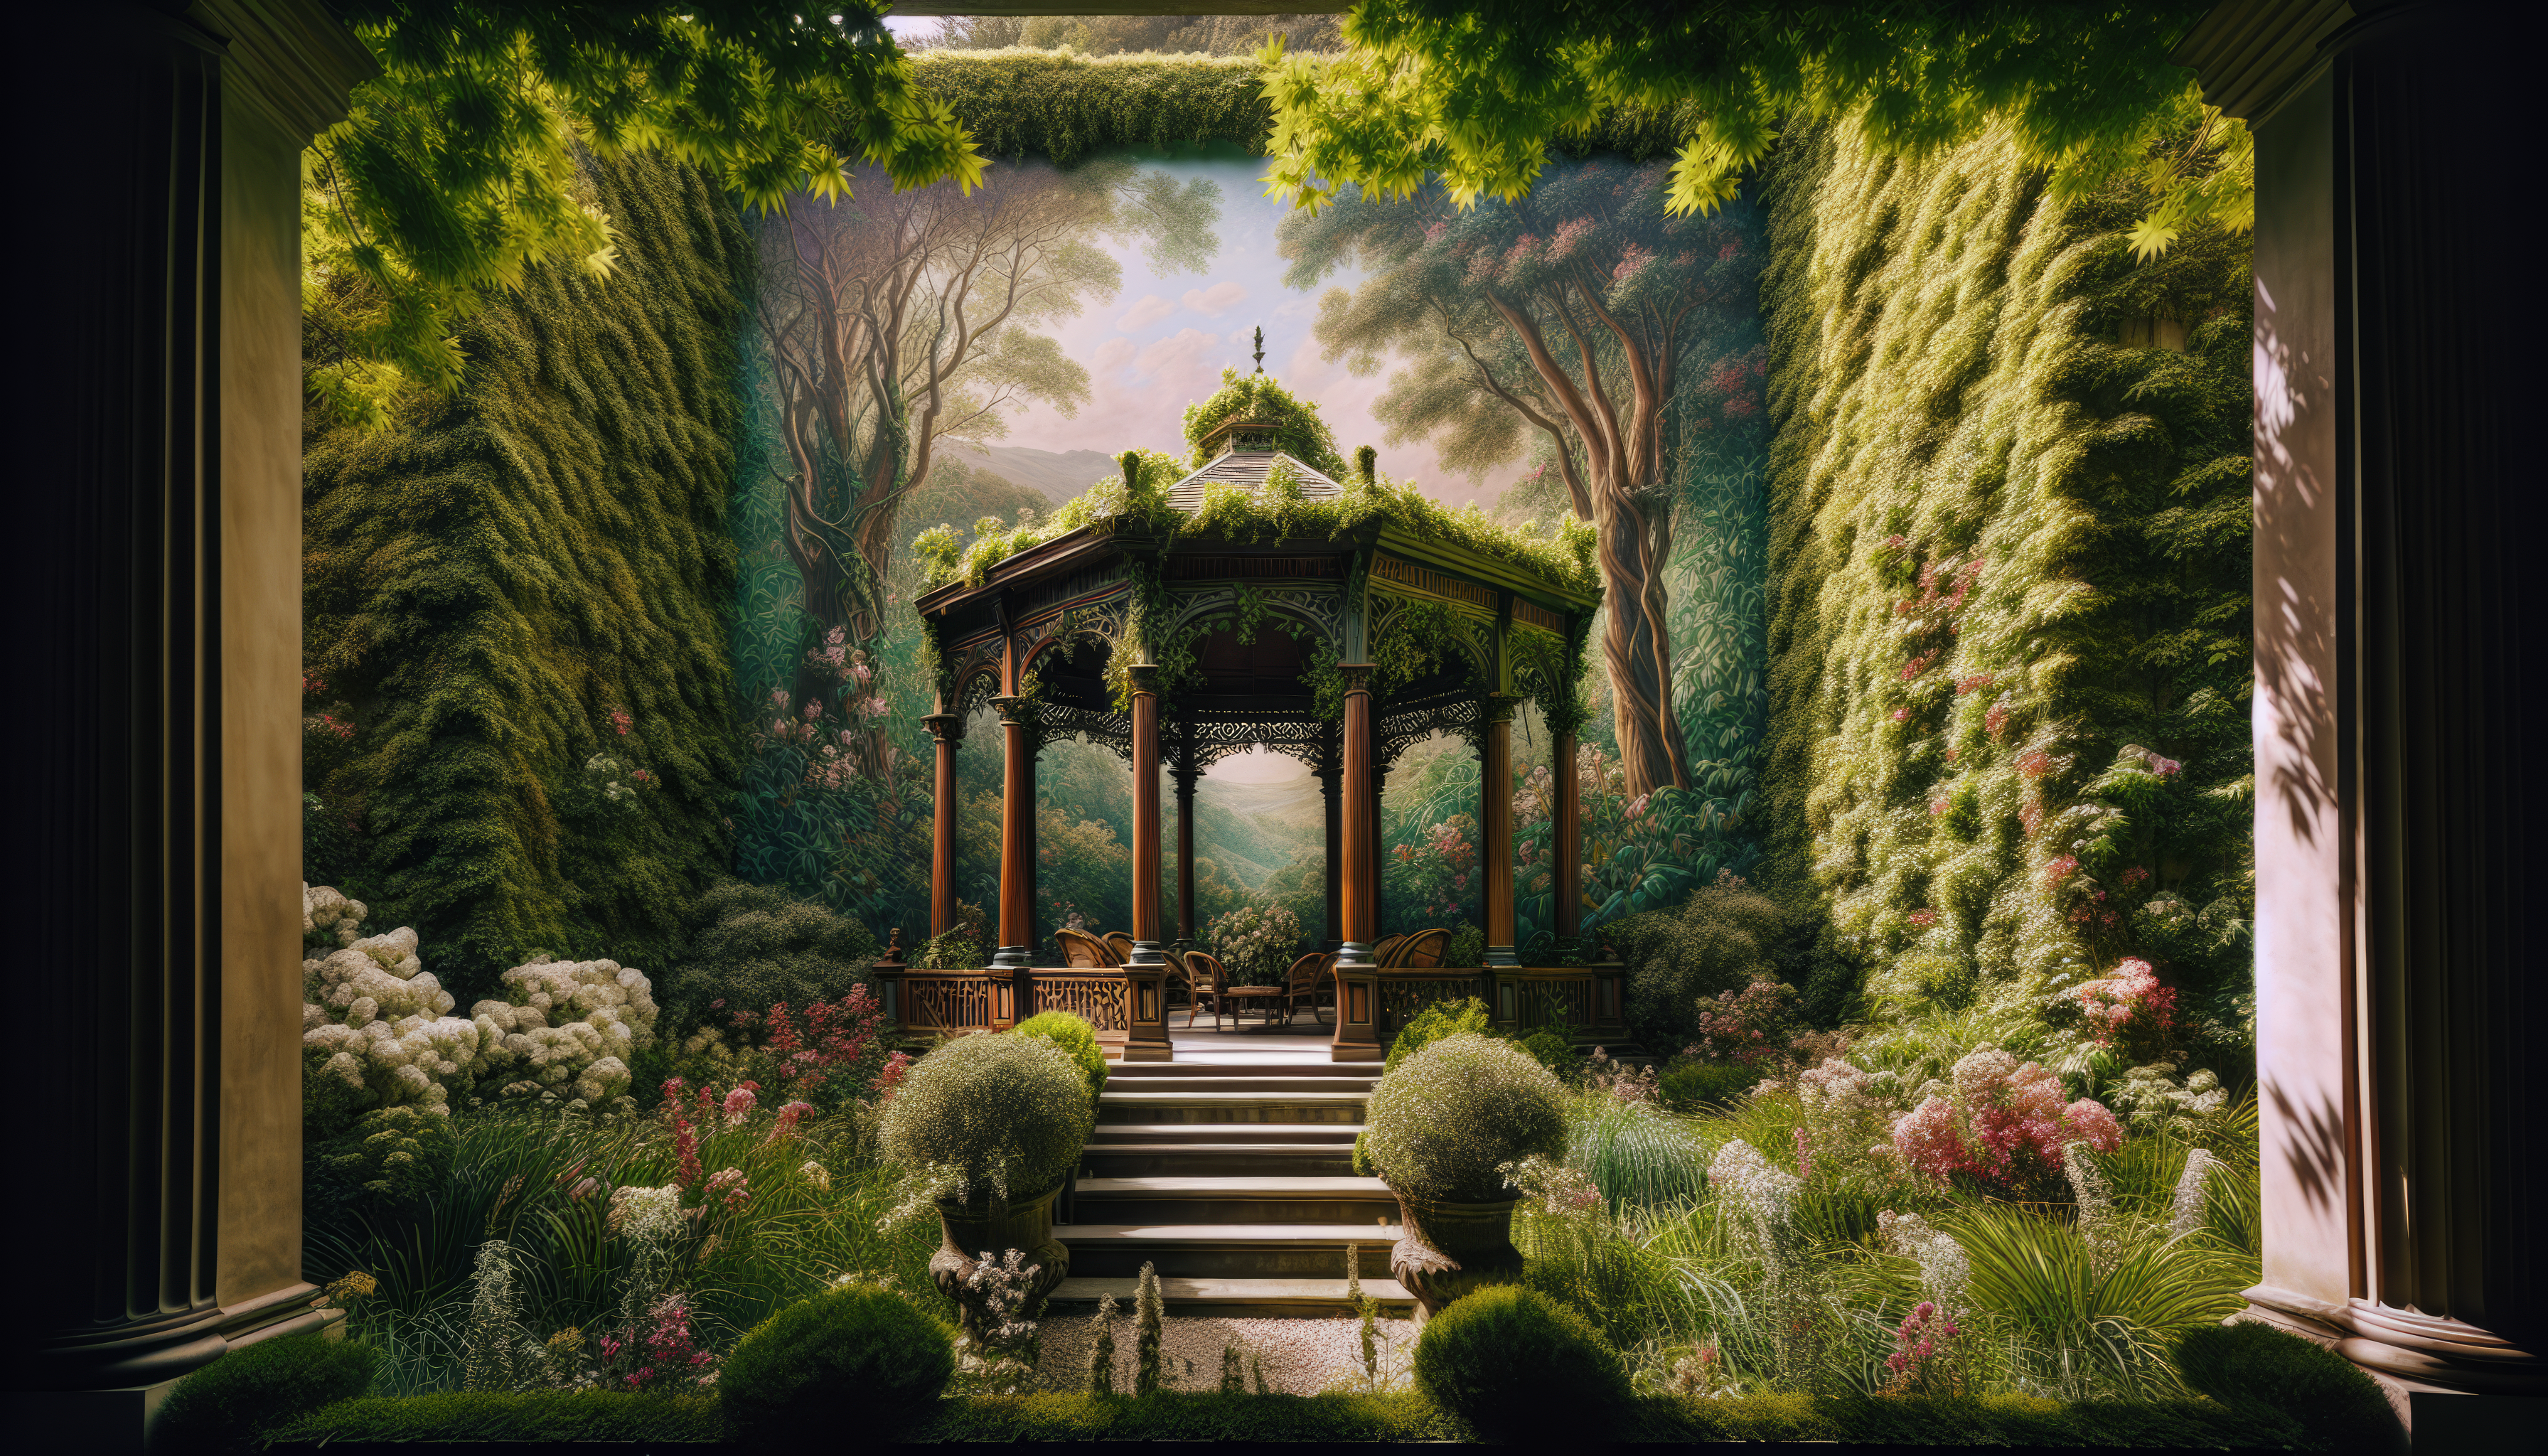 Enchanting gazebo in a lush garden with steps leading up to it, perfect for an HD desktop wallpaper background.